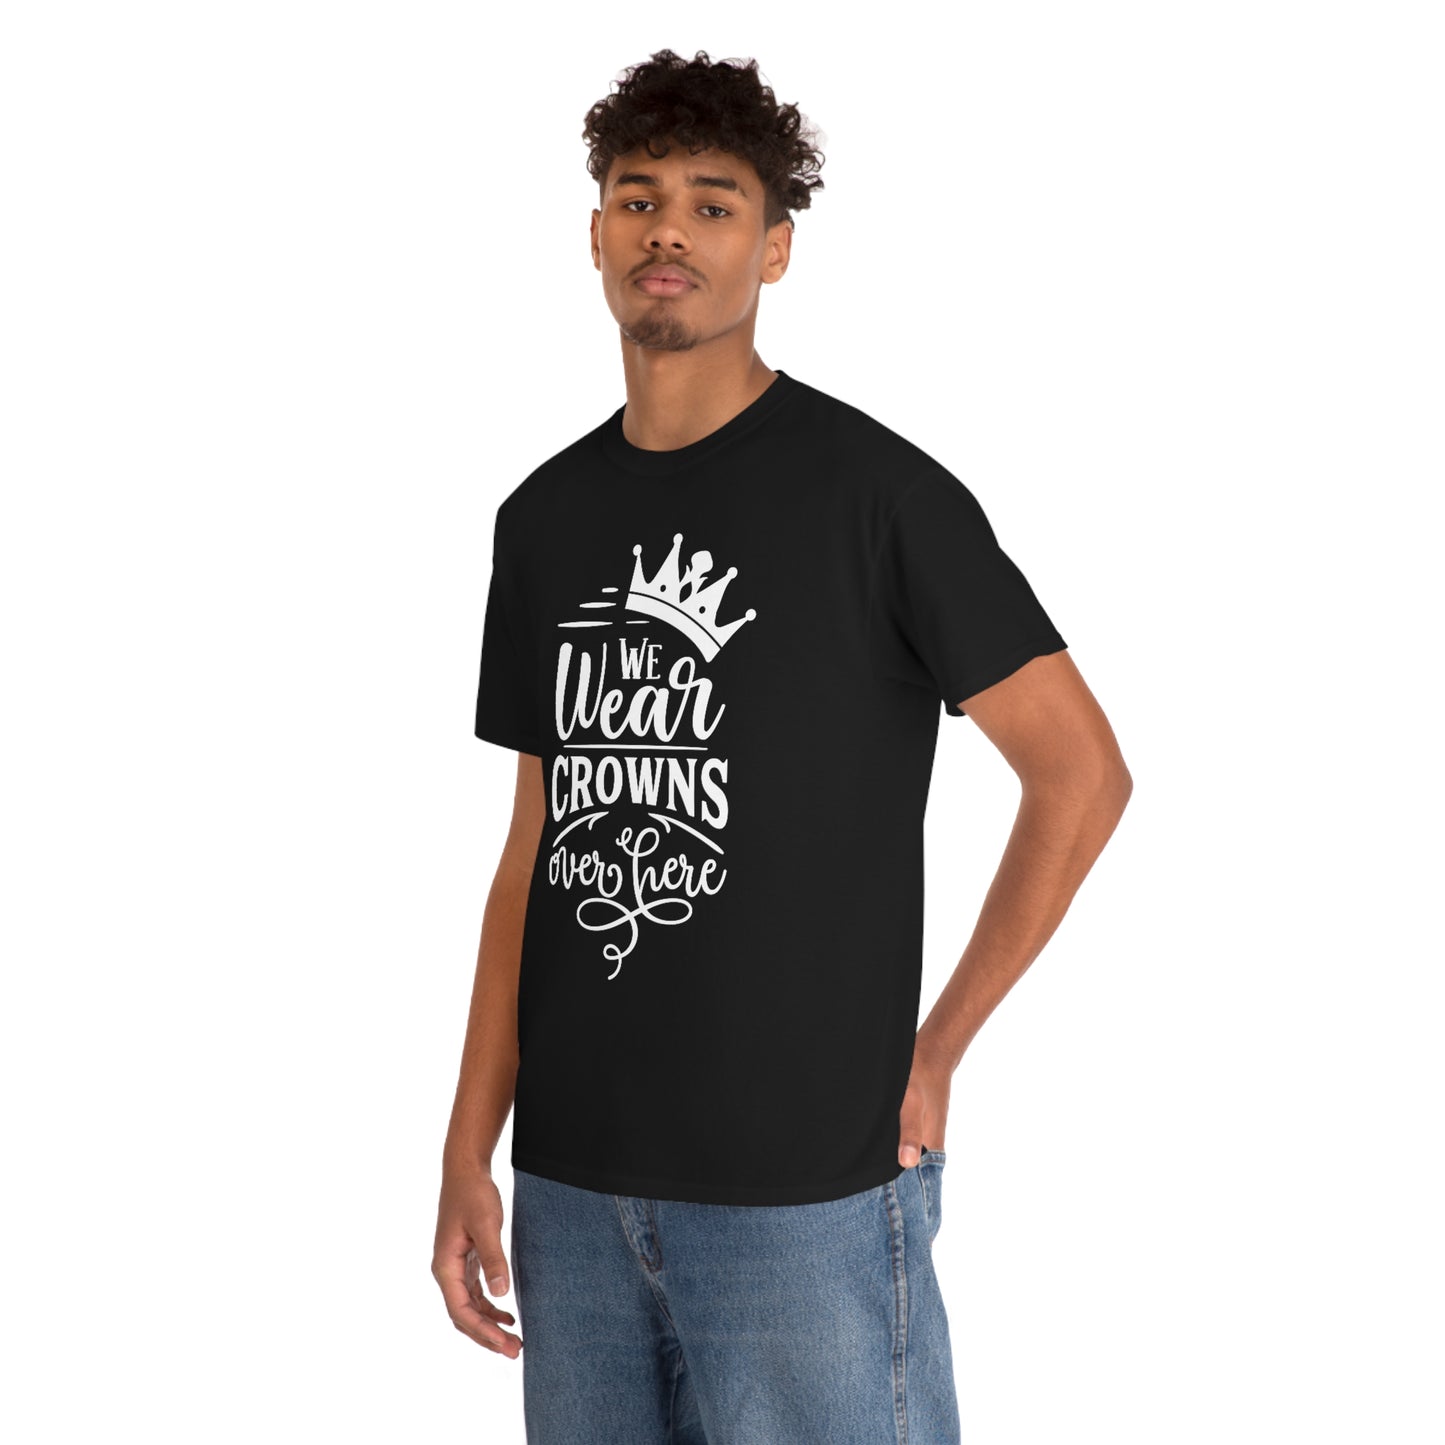 We Wear Crowns Over Here Unisex Heavy Cotton Tee